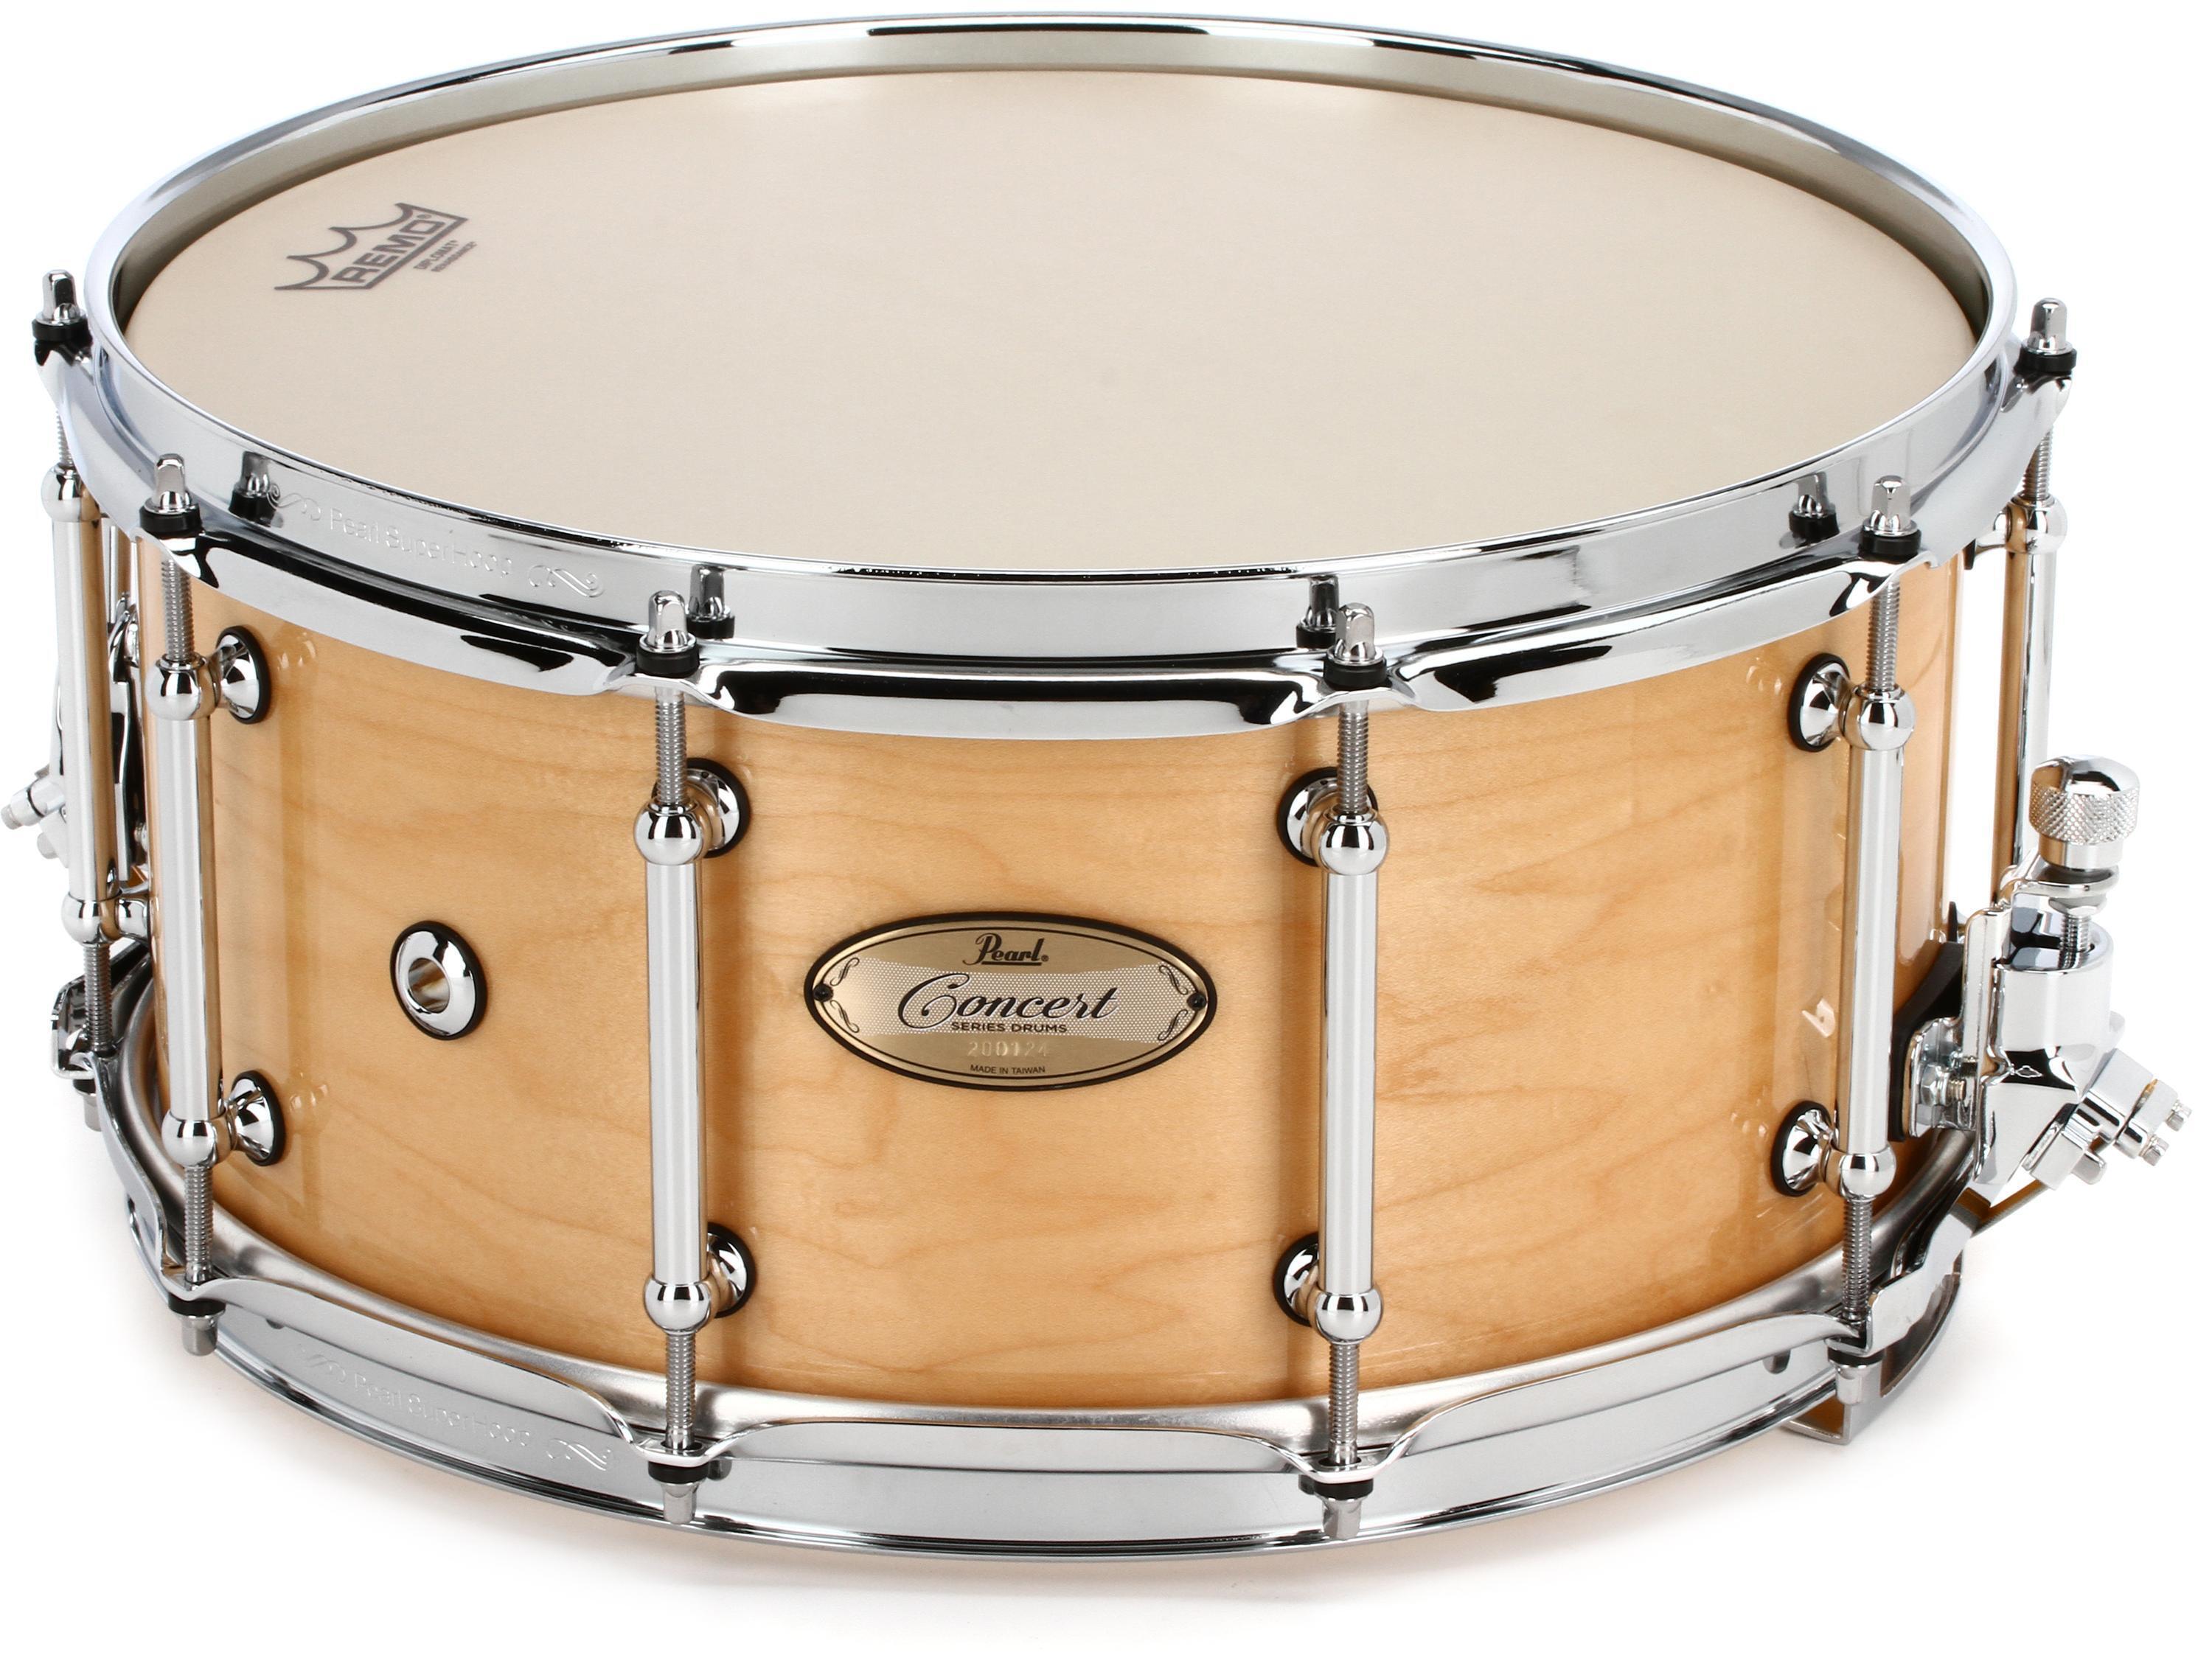 Pearl Concert Snare Drum - 6.5 inch x 14 inch - Natural Maple